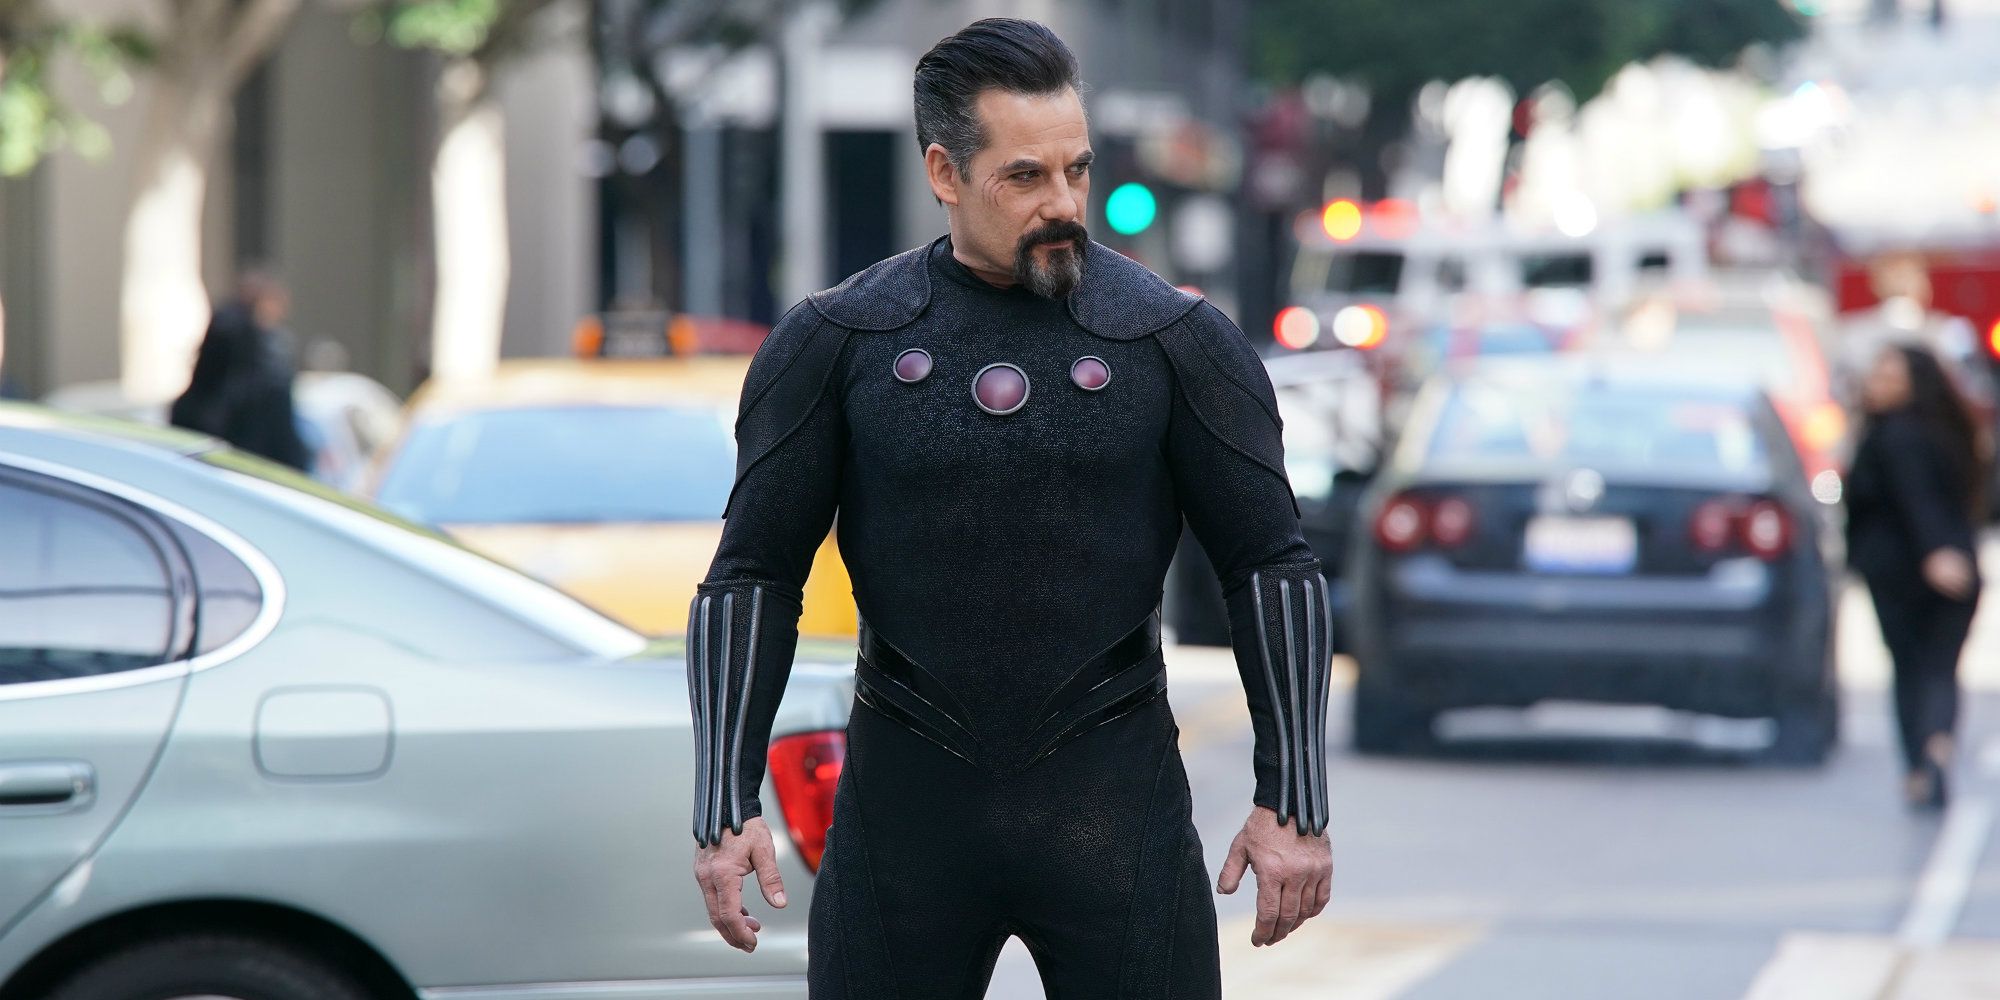 General Talbot as Graviton in New York in Agents of Shield